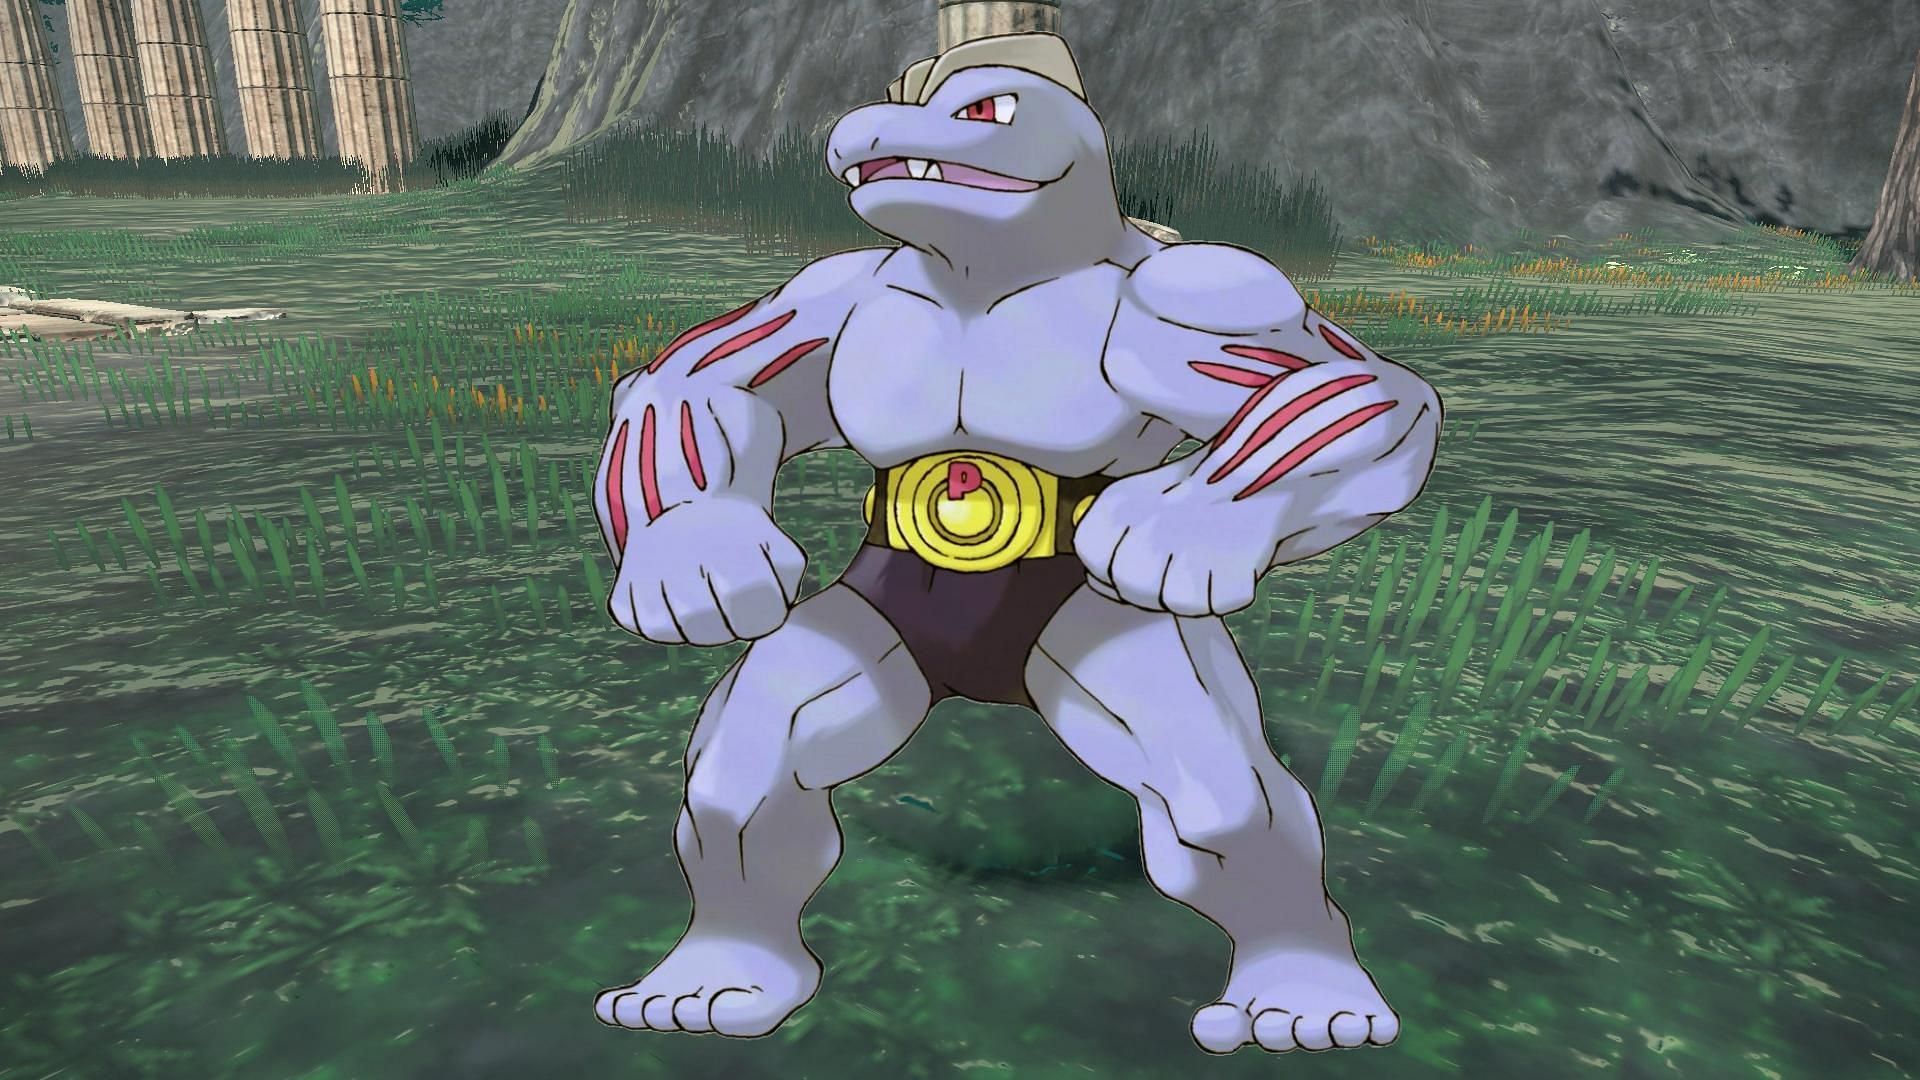 Official artwork for Machoke used throughout the franchise (Image via The Pokemon Company)